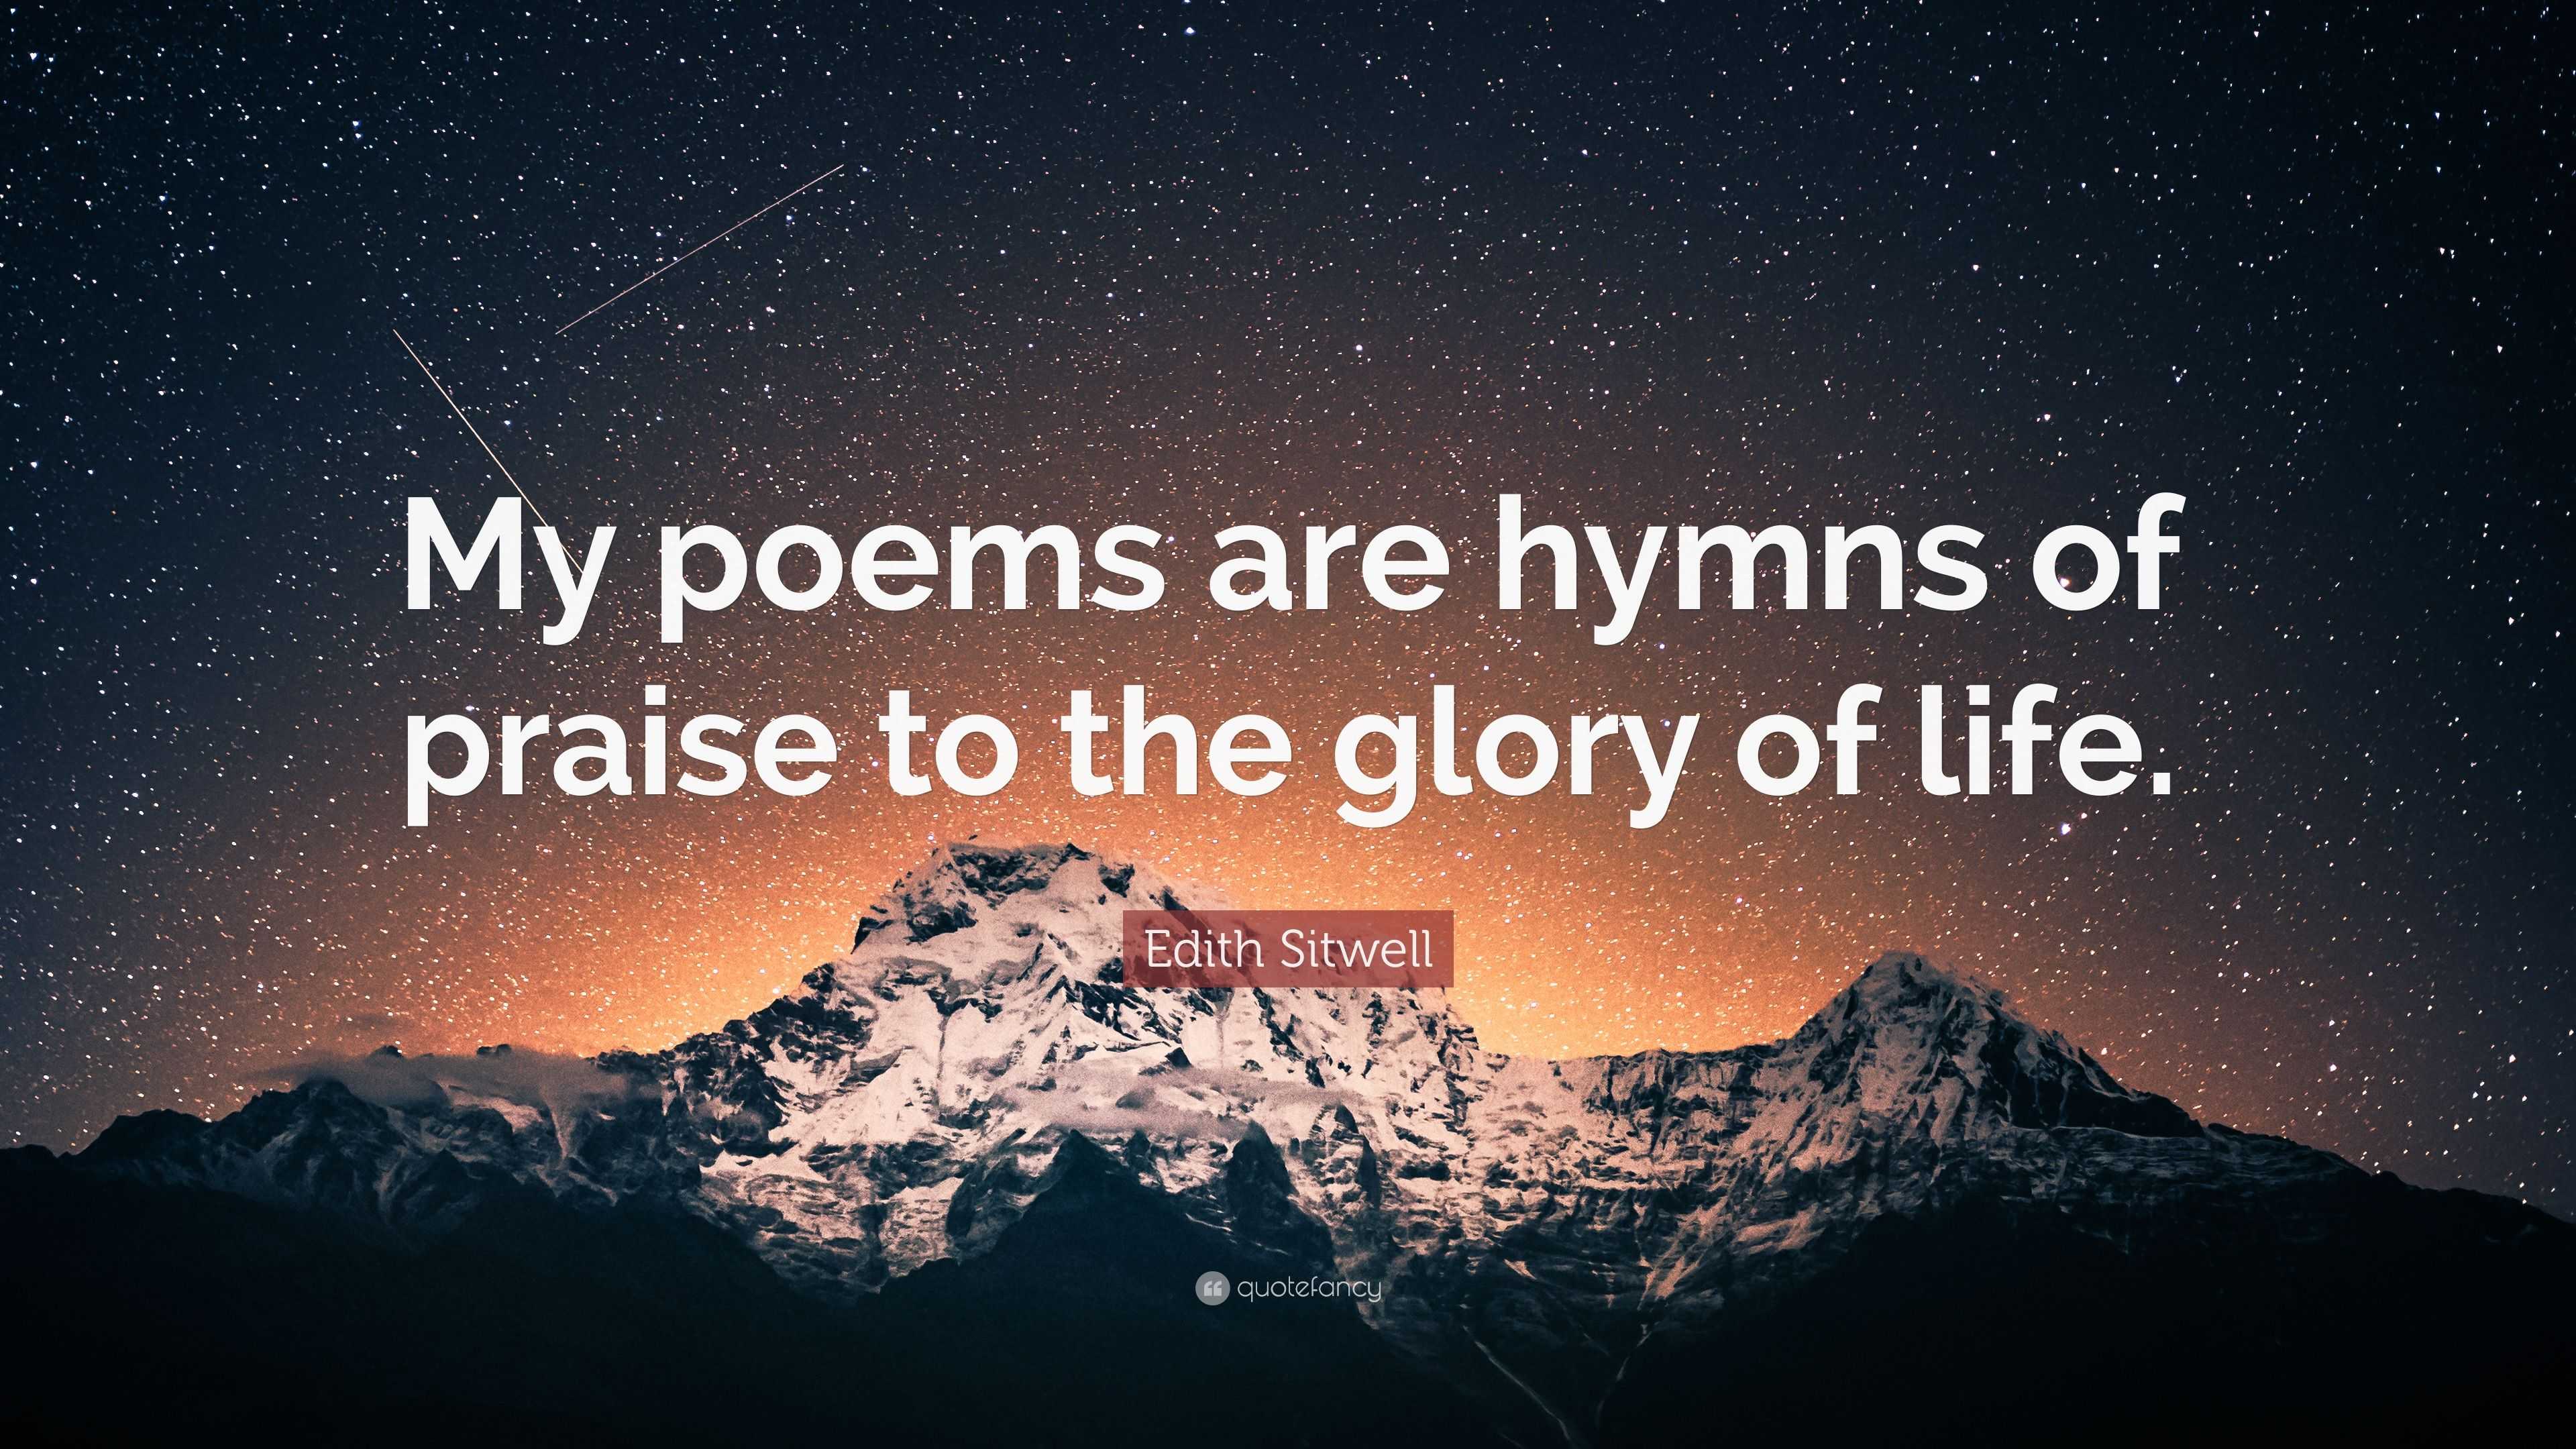 Edith Sitwell Quote: “My poems are hymns of praise to the glory of life